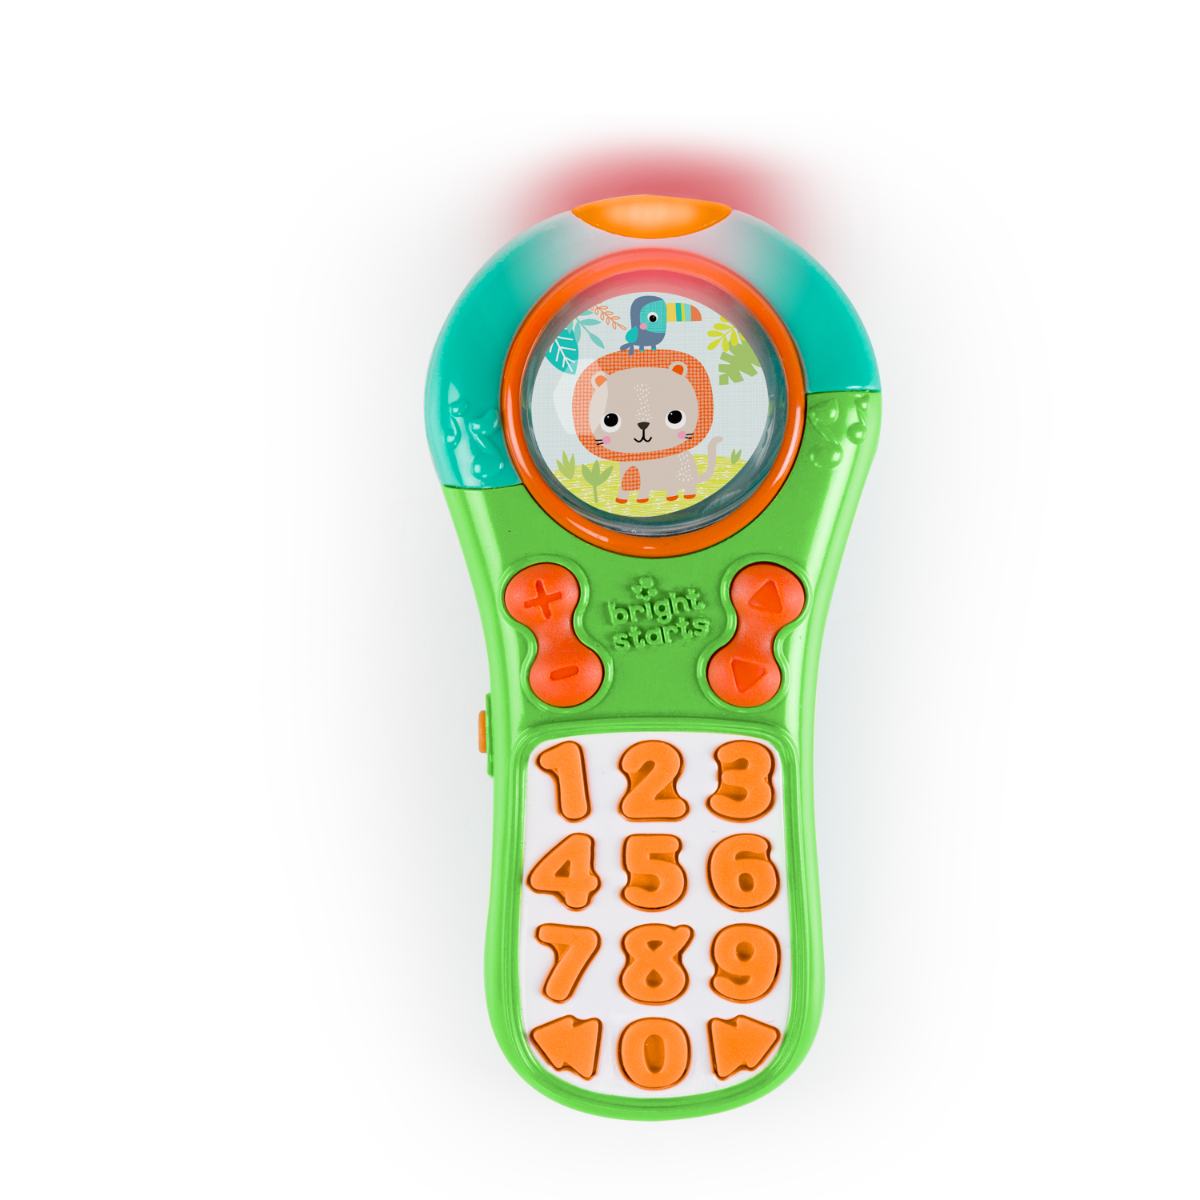 click-giggle-remote-toy